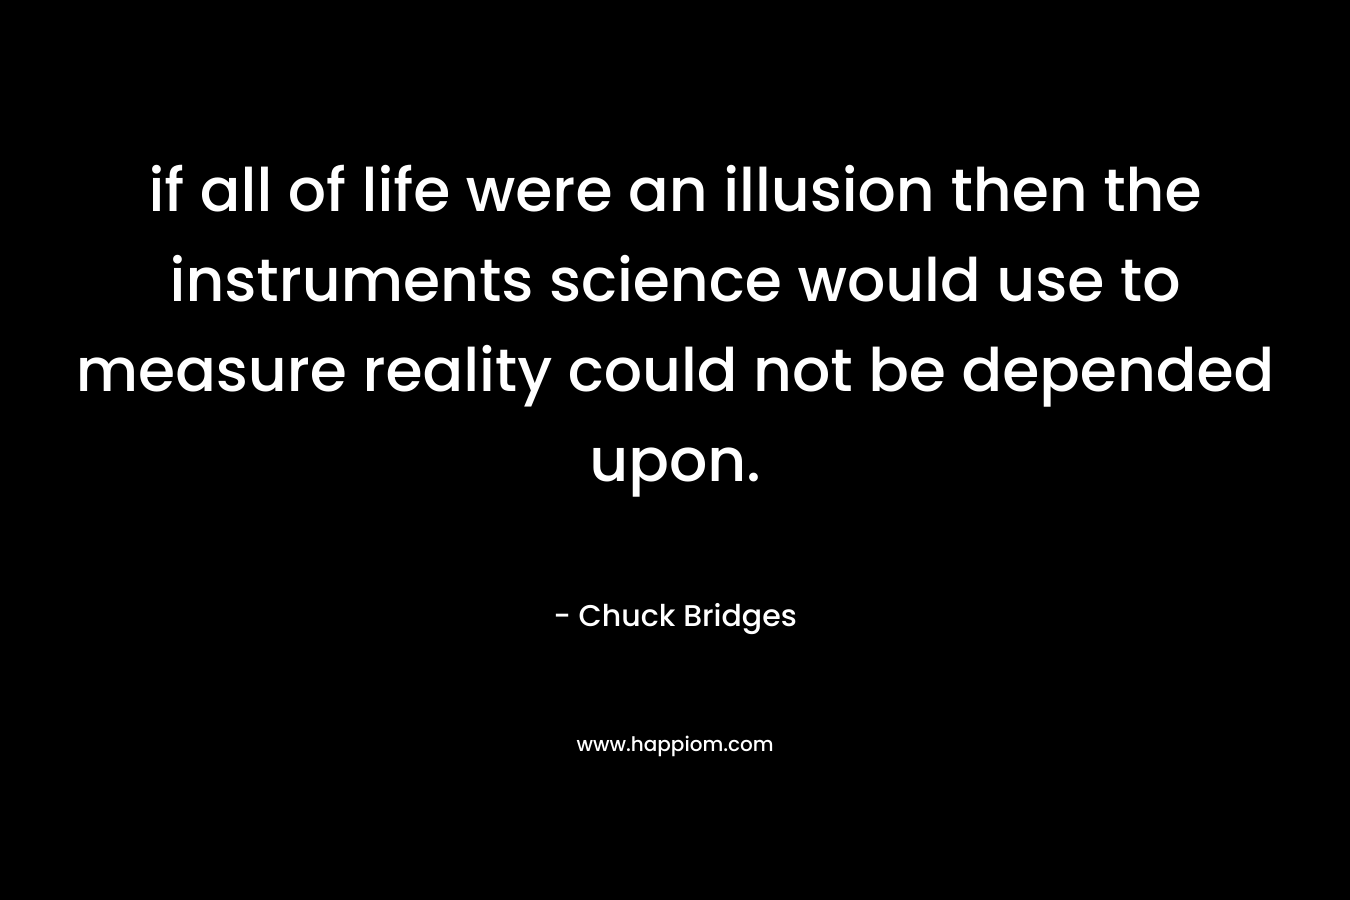 if all of life were an illusion then the instruments science would use to measure reality could not be depended upon.